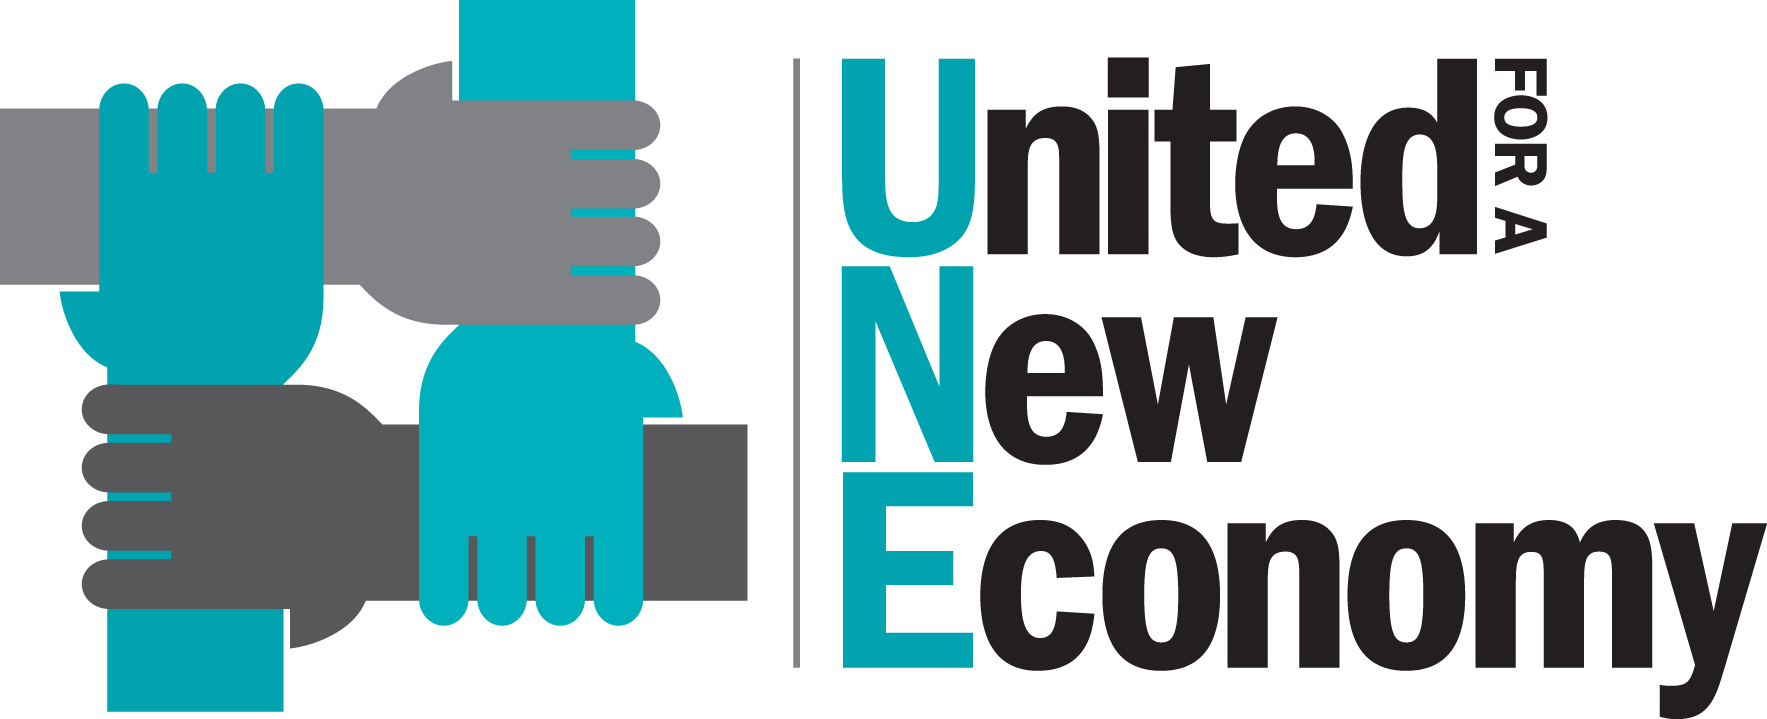 United for a New Economy